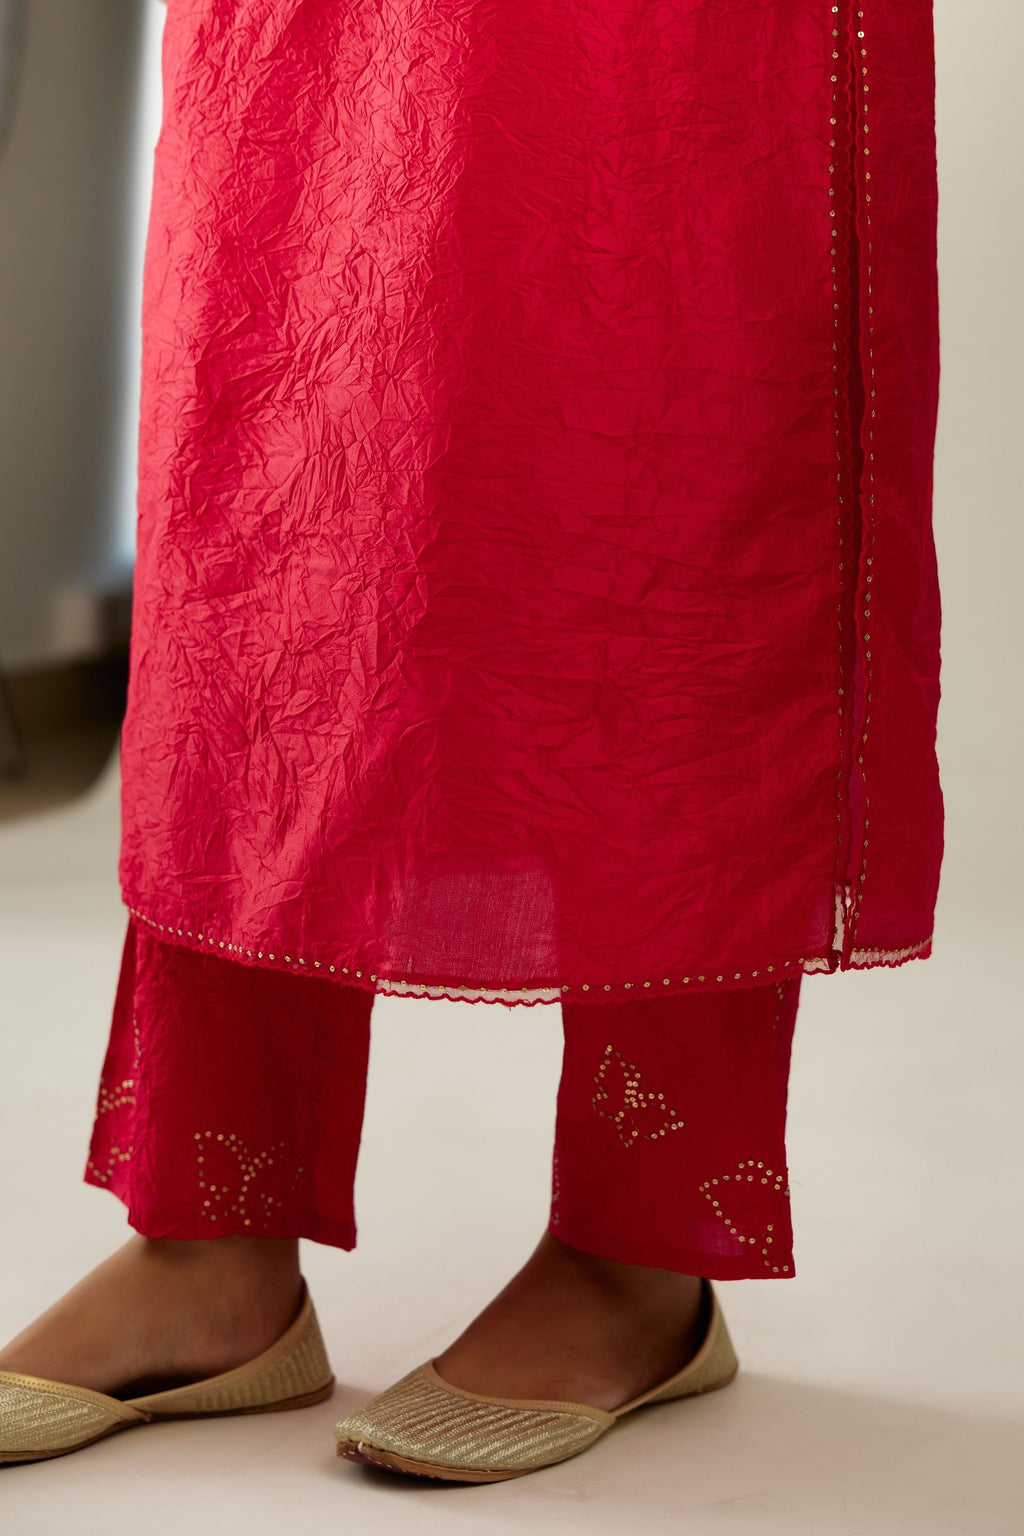 Red silk straight kurta set, highlighted with organza and sequins at edges.